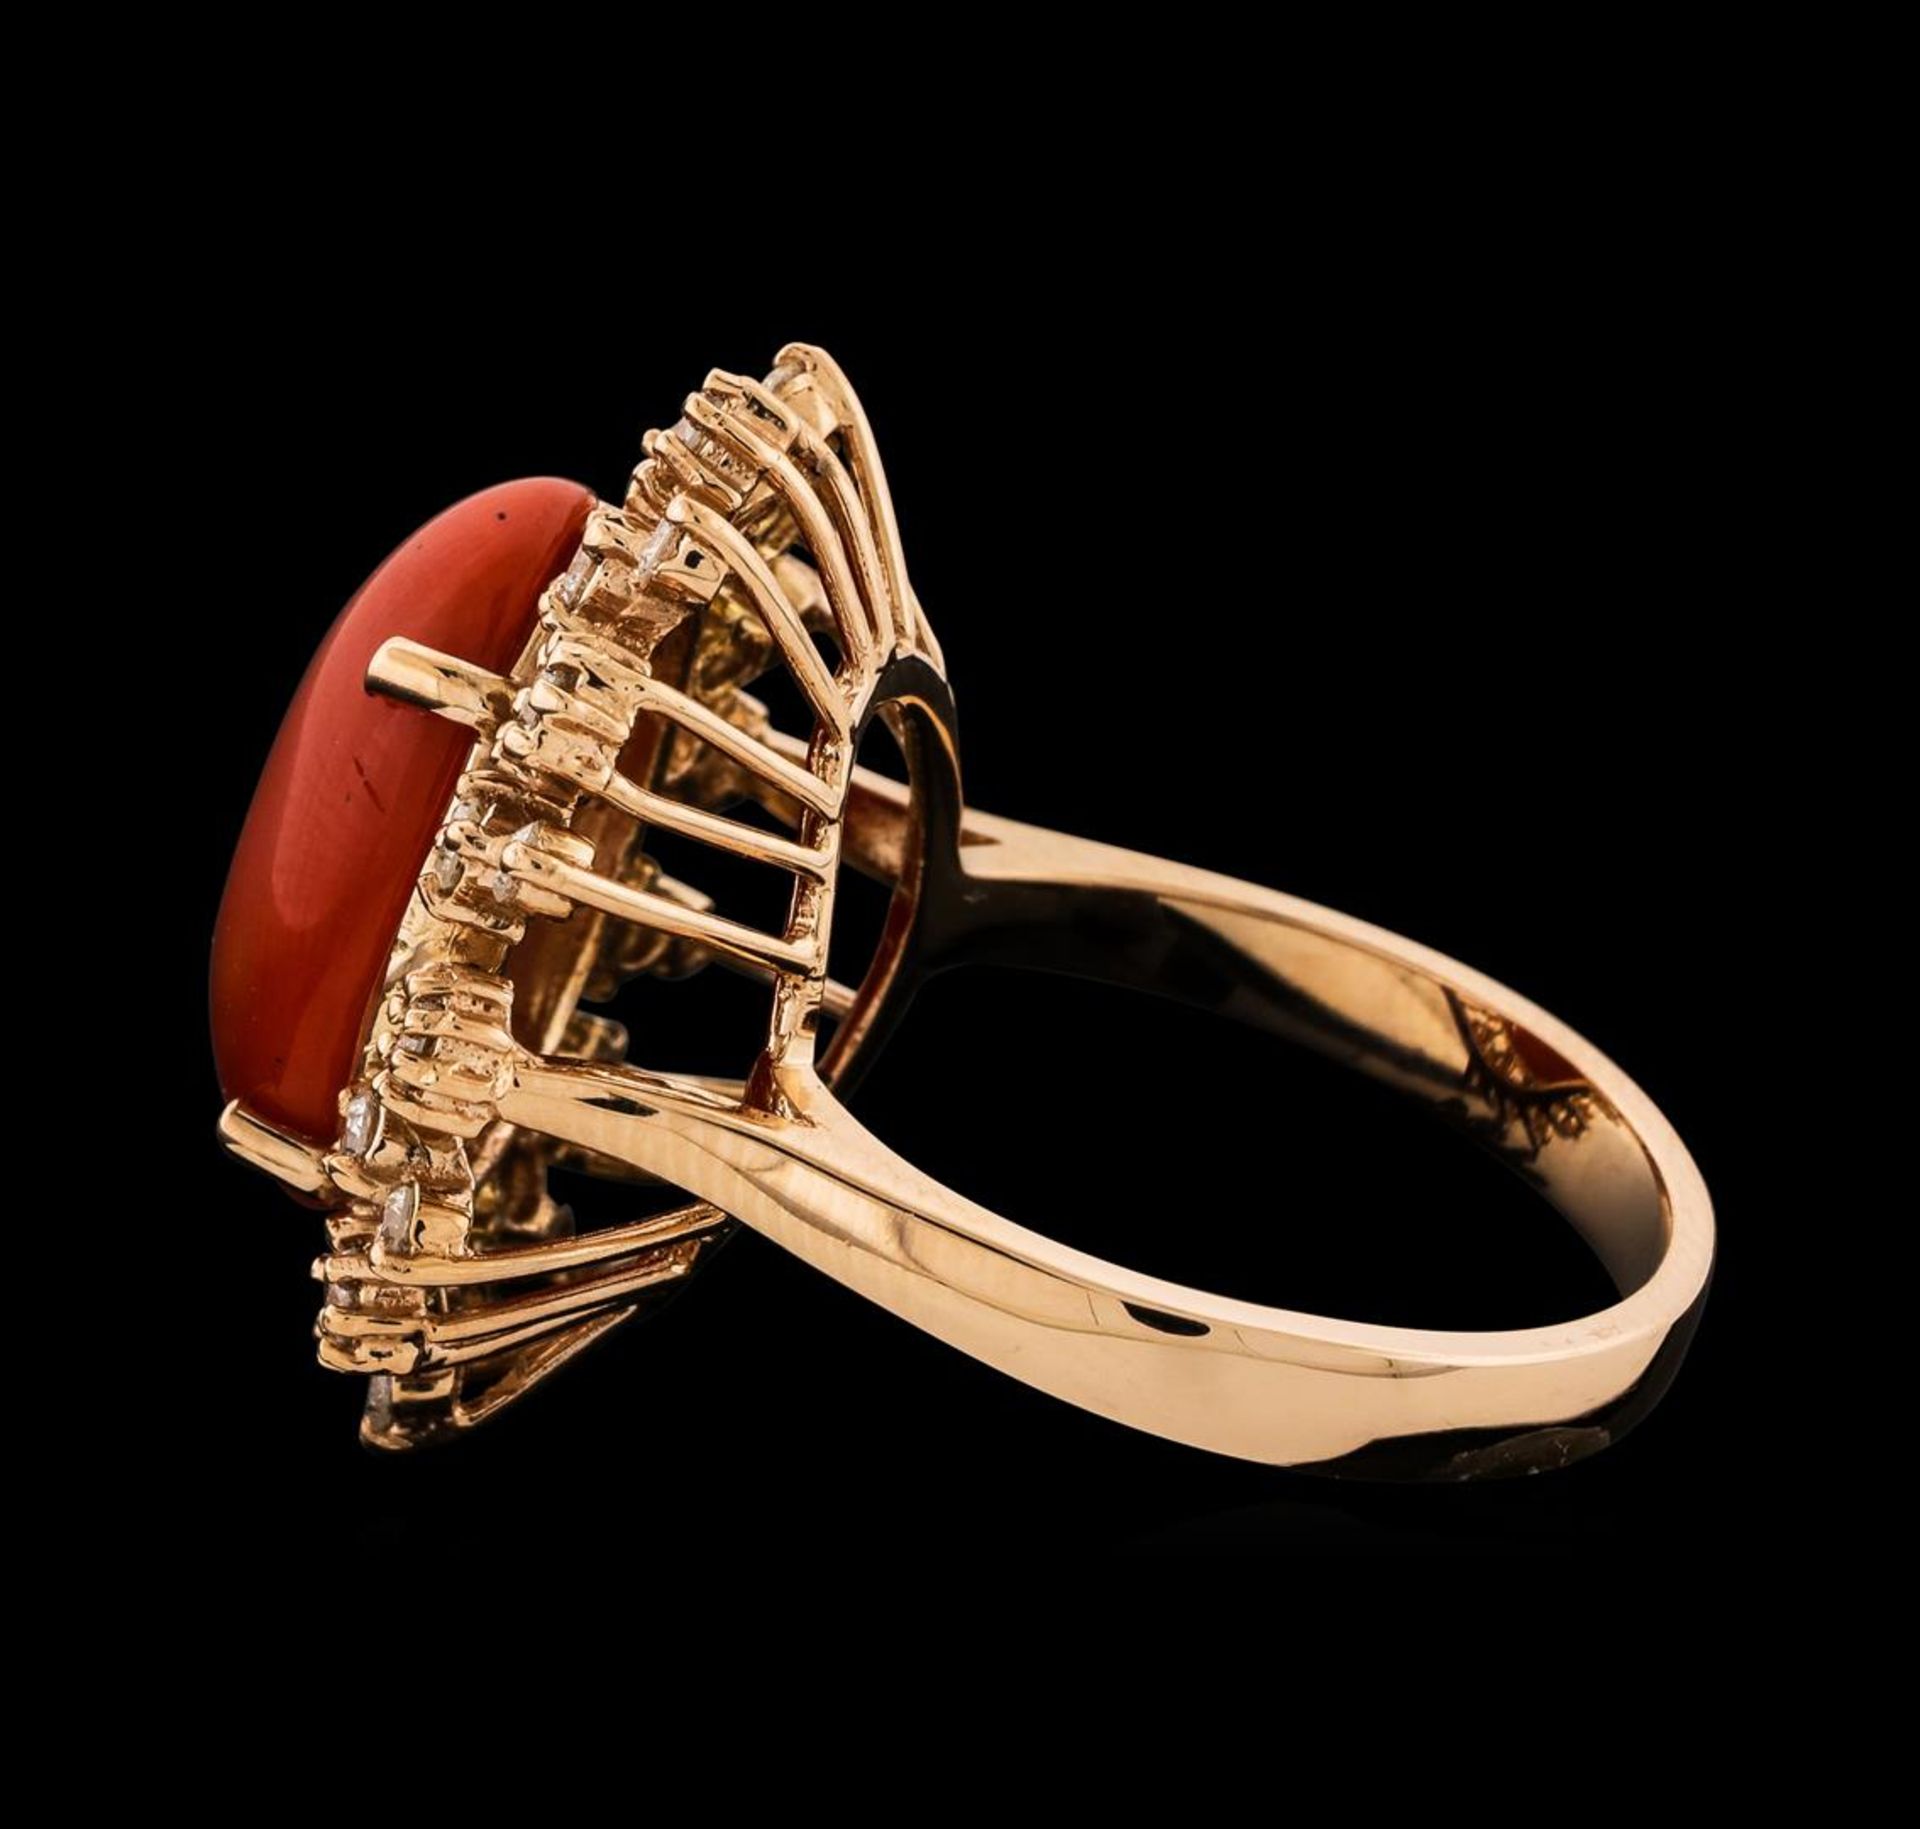 5.07 ctw Coral and Diamond Ring - 14KT Rose Gold - Image 3 of 4